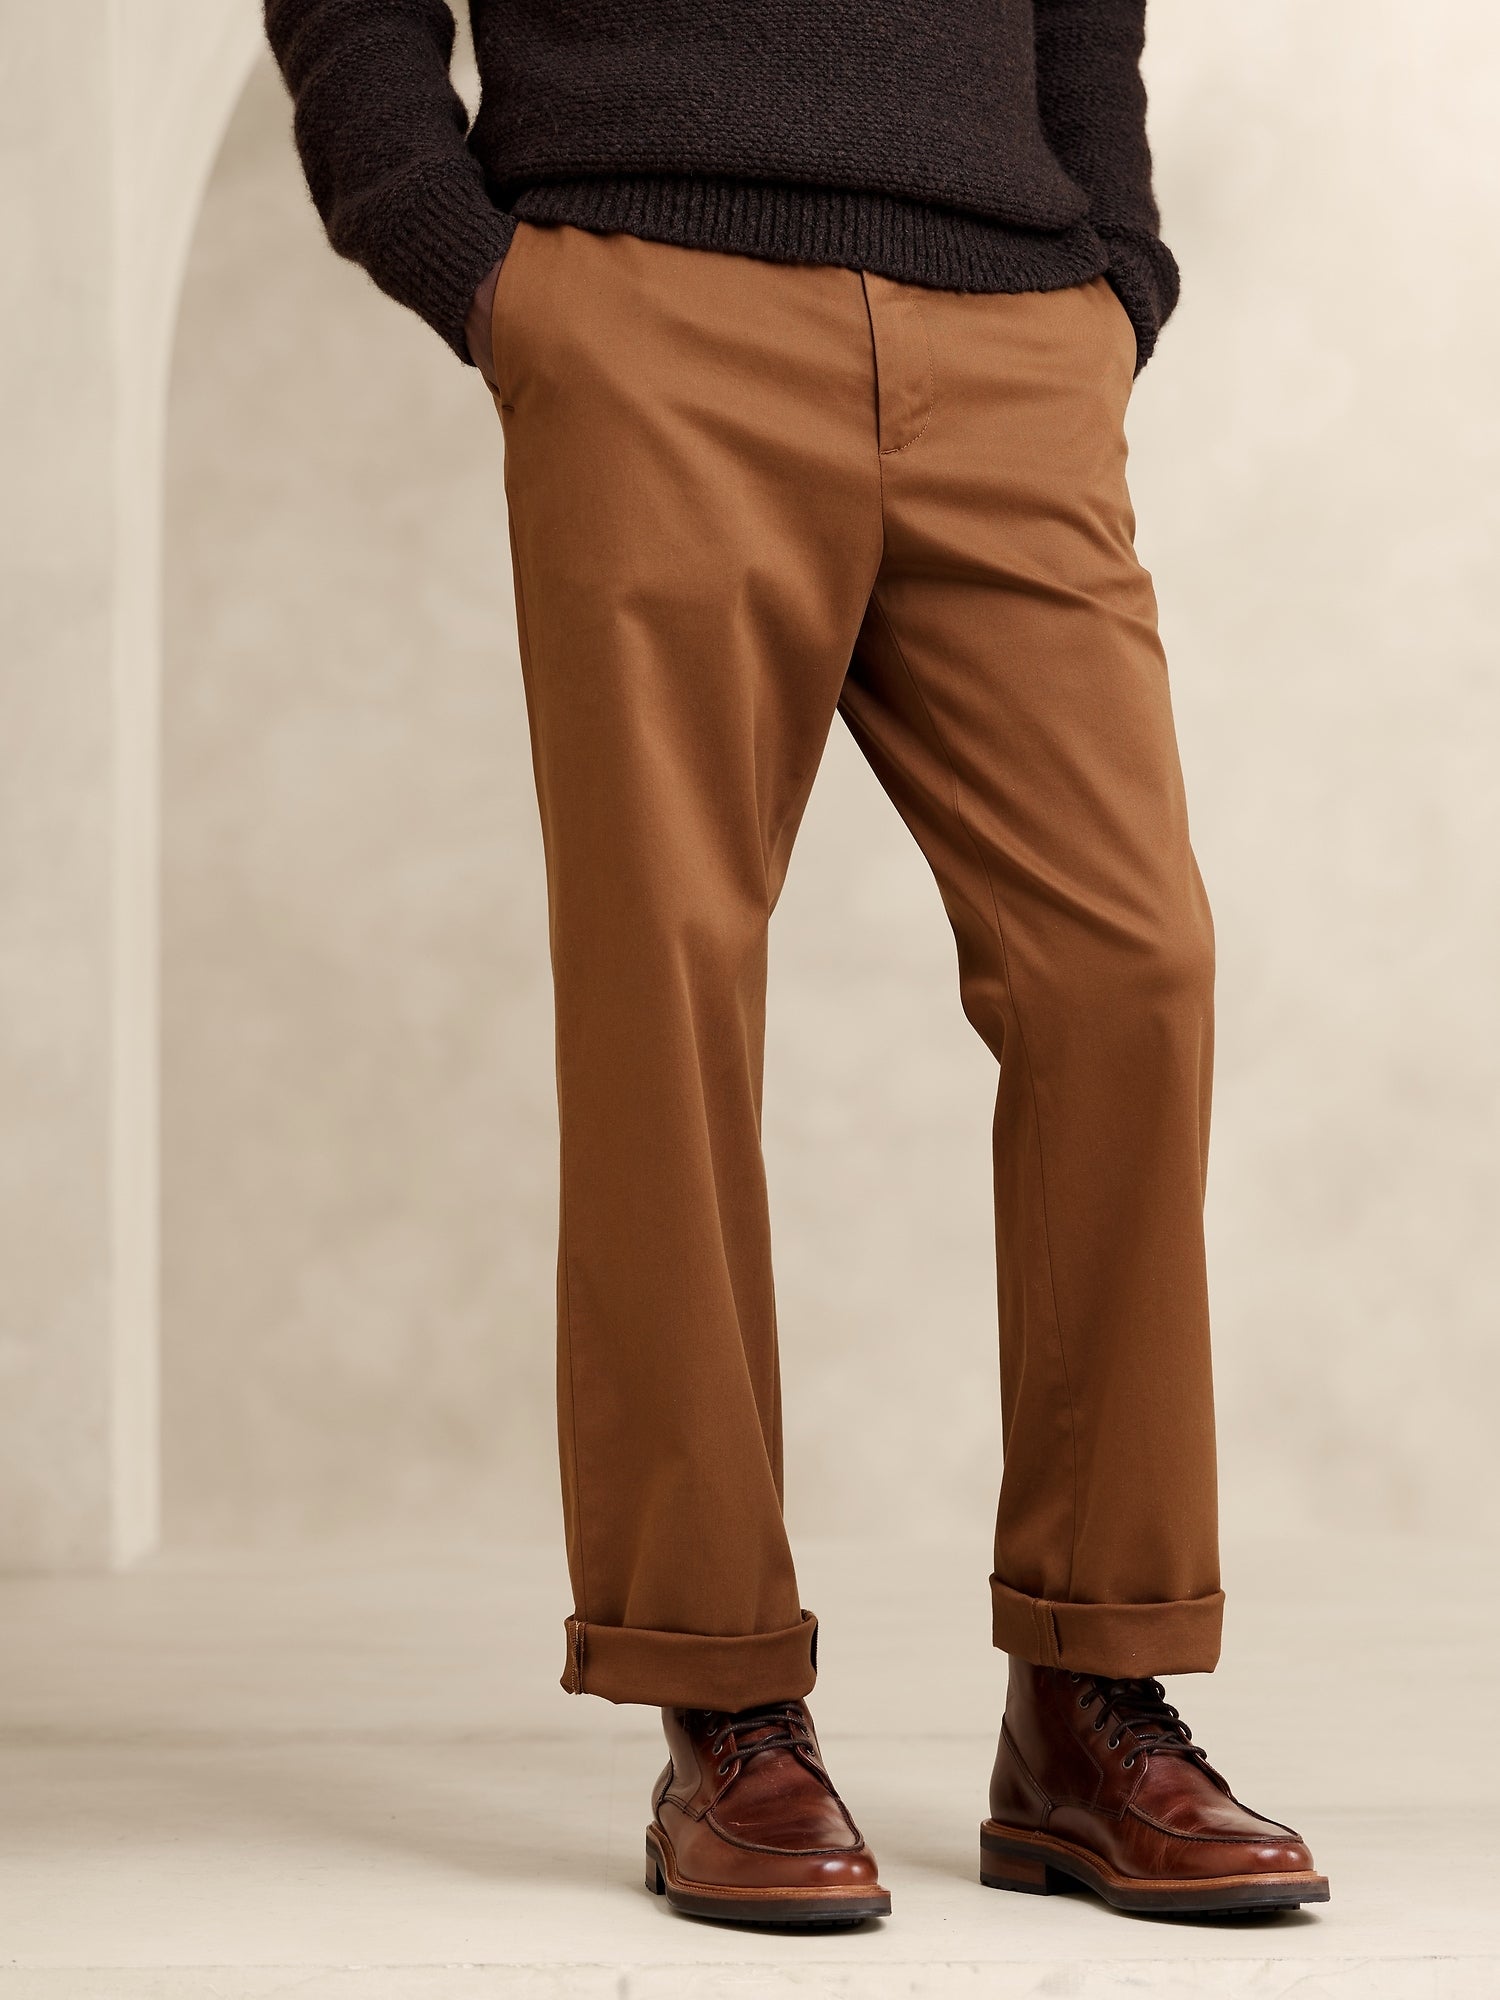 BR ARCHIVES Dawson Relaxed Rapid Movement Chino, Banana Republic